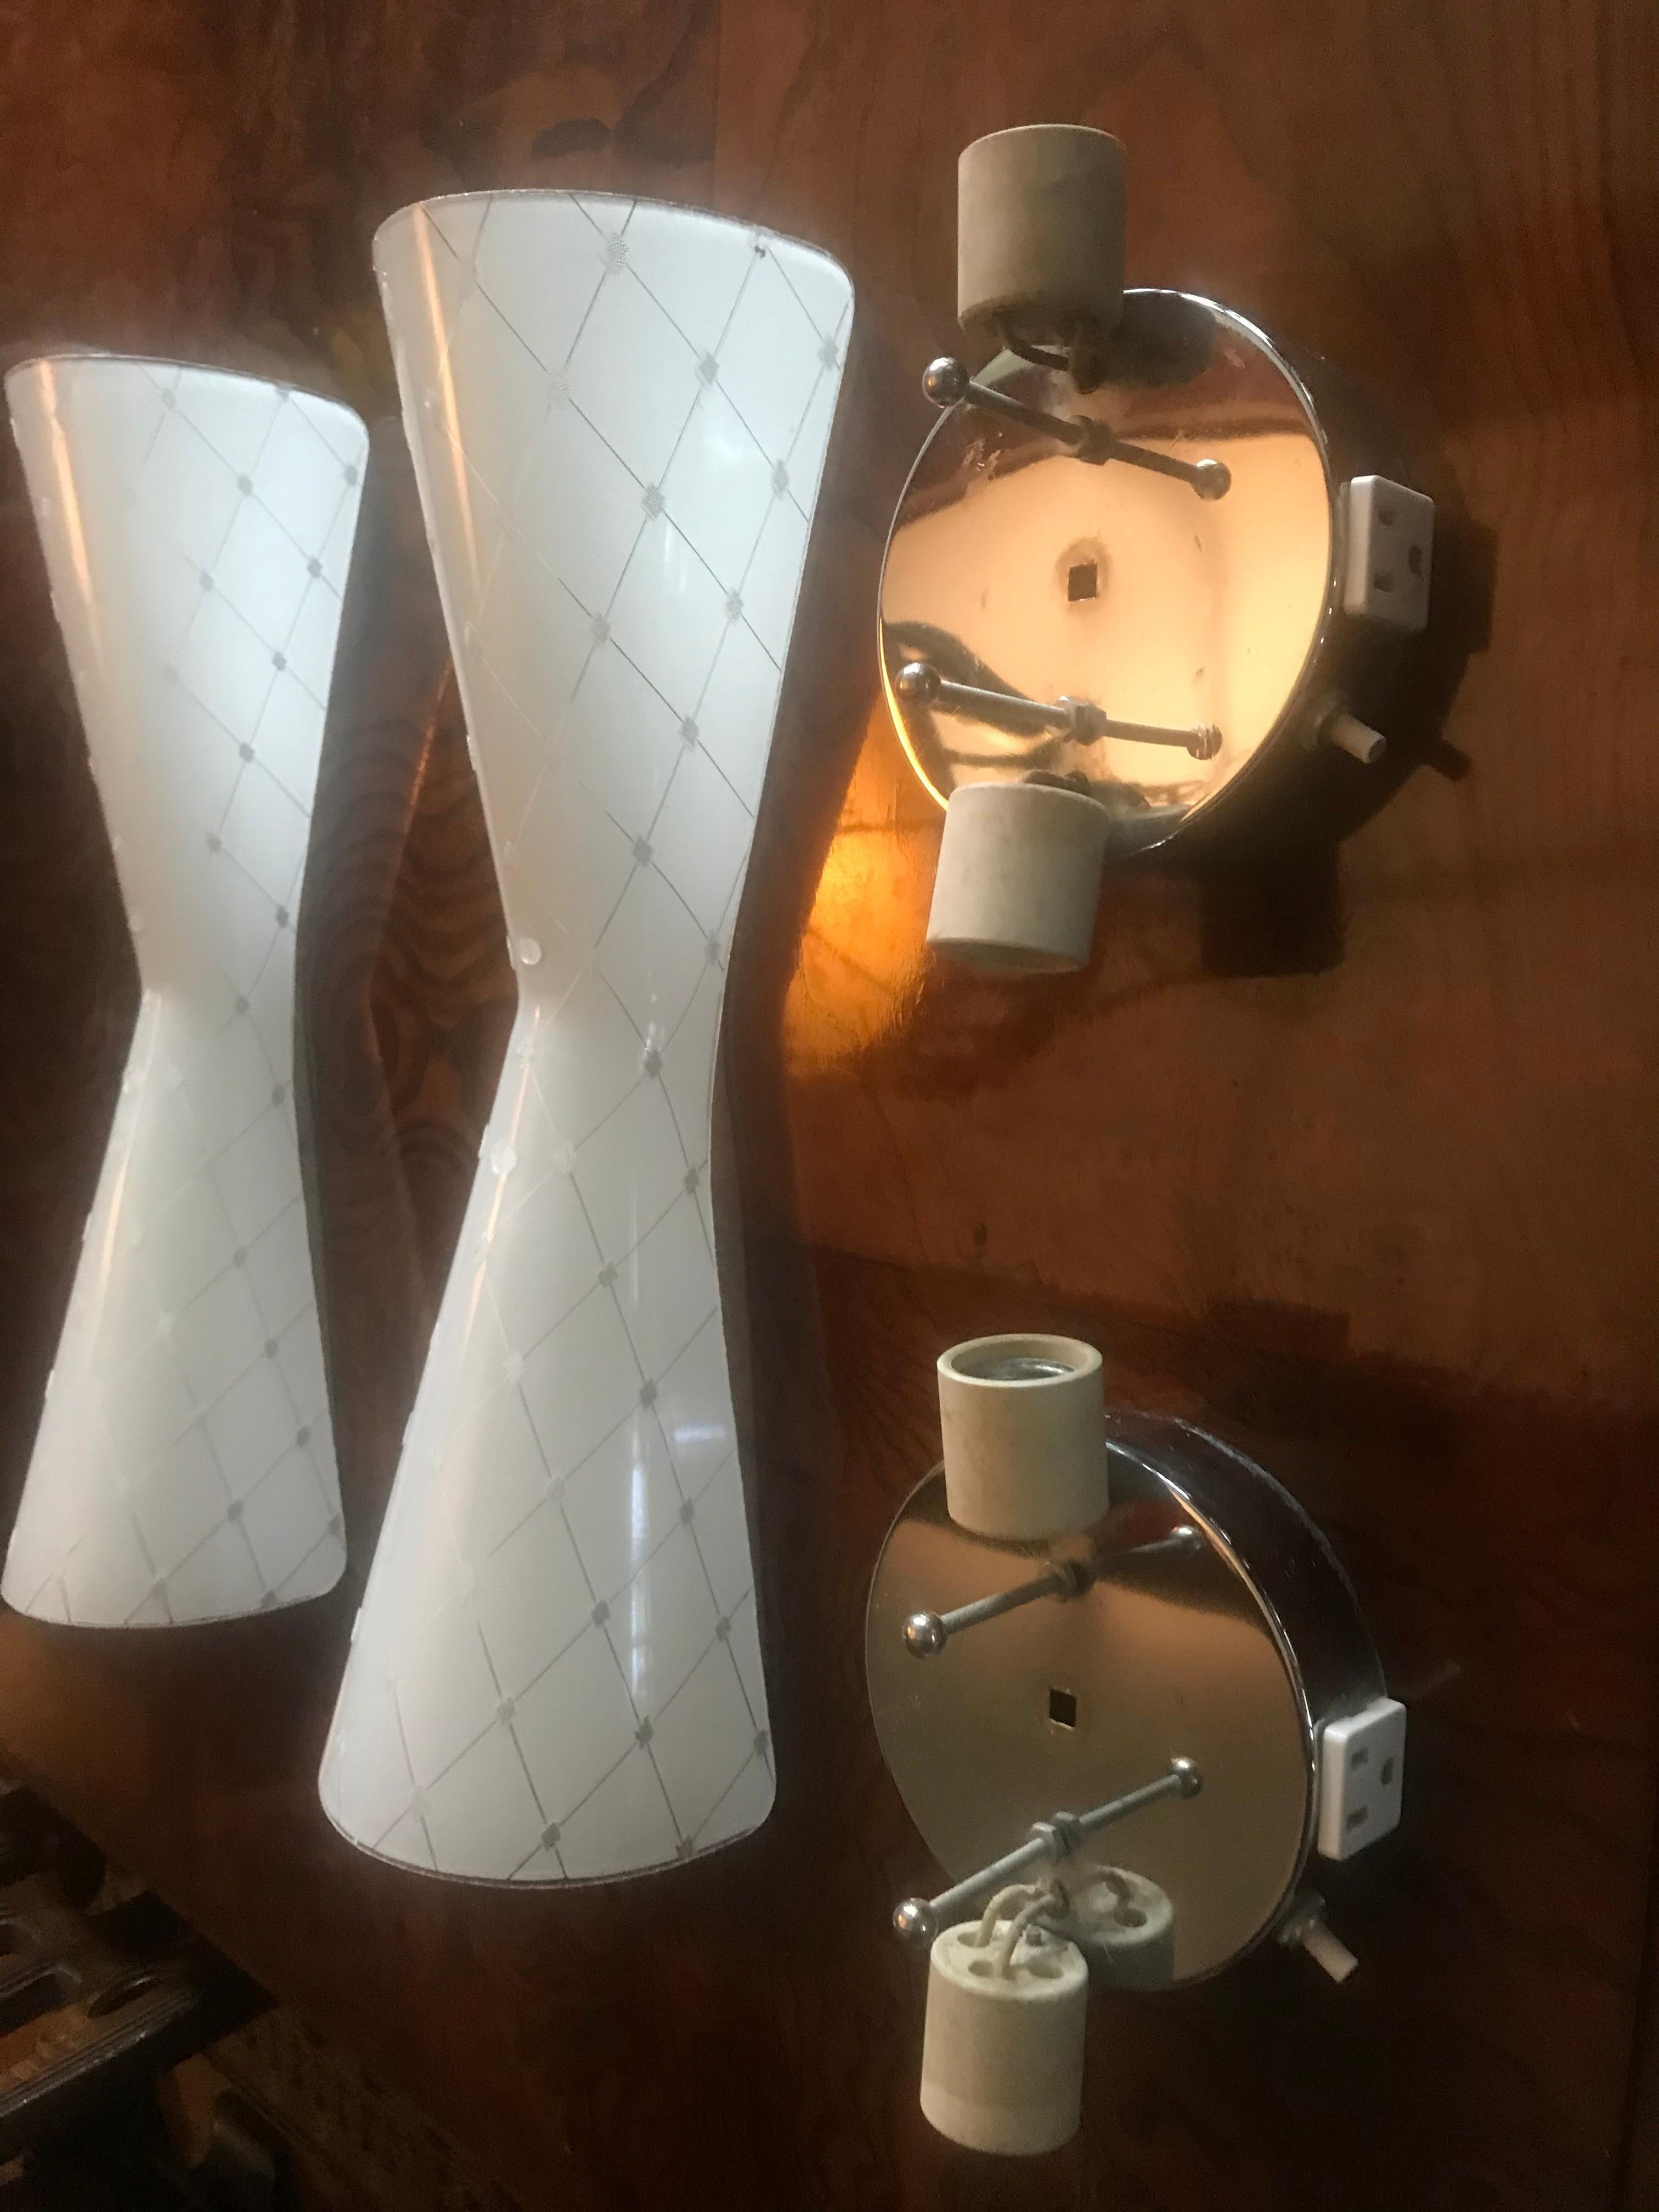 Stunning, modernist etched hour-glass wall sconces, made by moe lighting, in the style of Tommi Parzinger, funky yet elegant, retain original chrome back plates with on/off switch and electrical outlit. Fit seamlessly into any Mid-Century Modern,